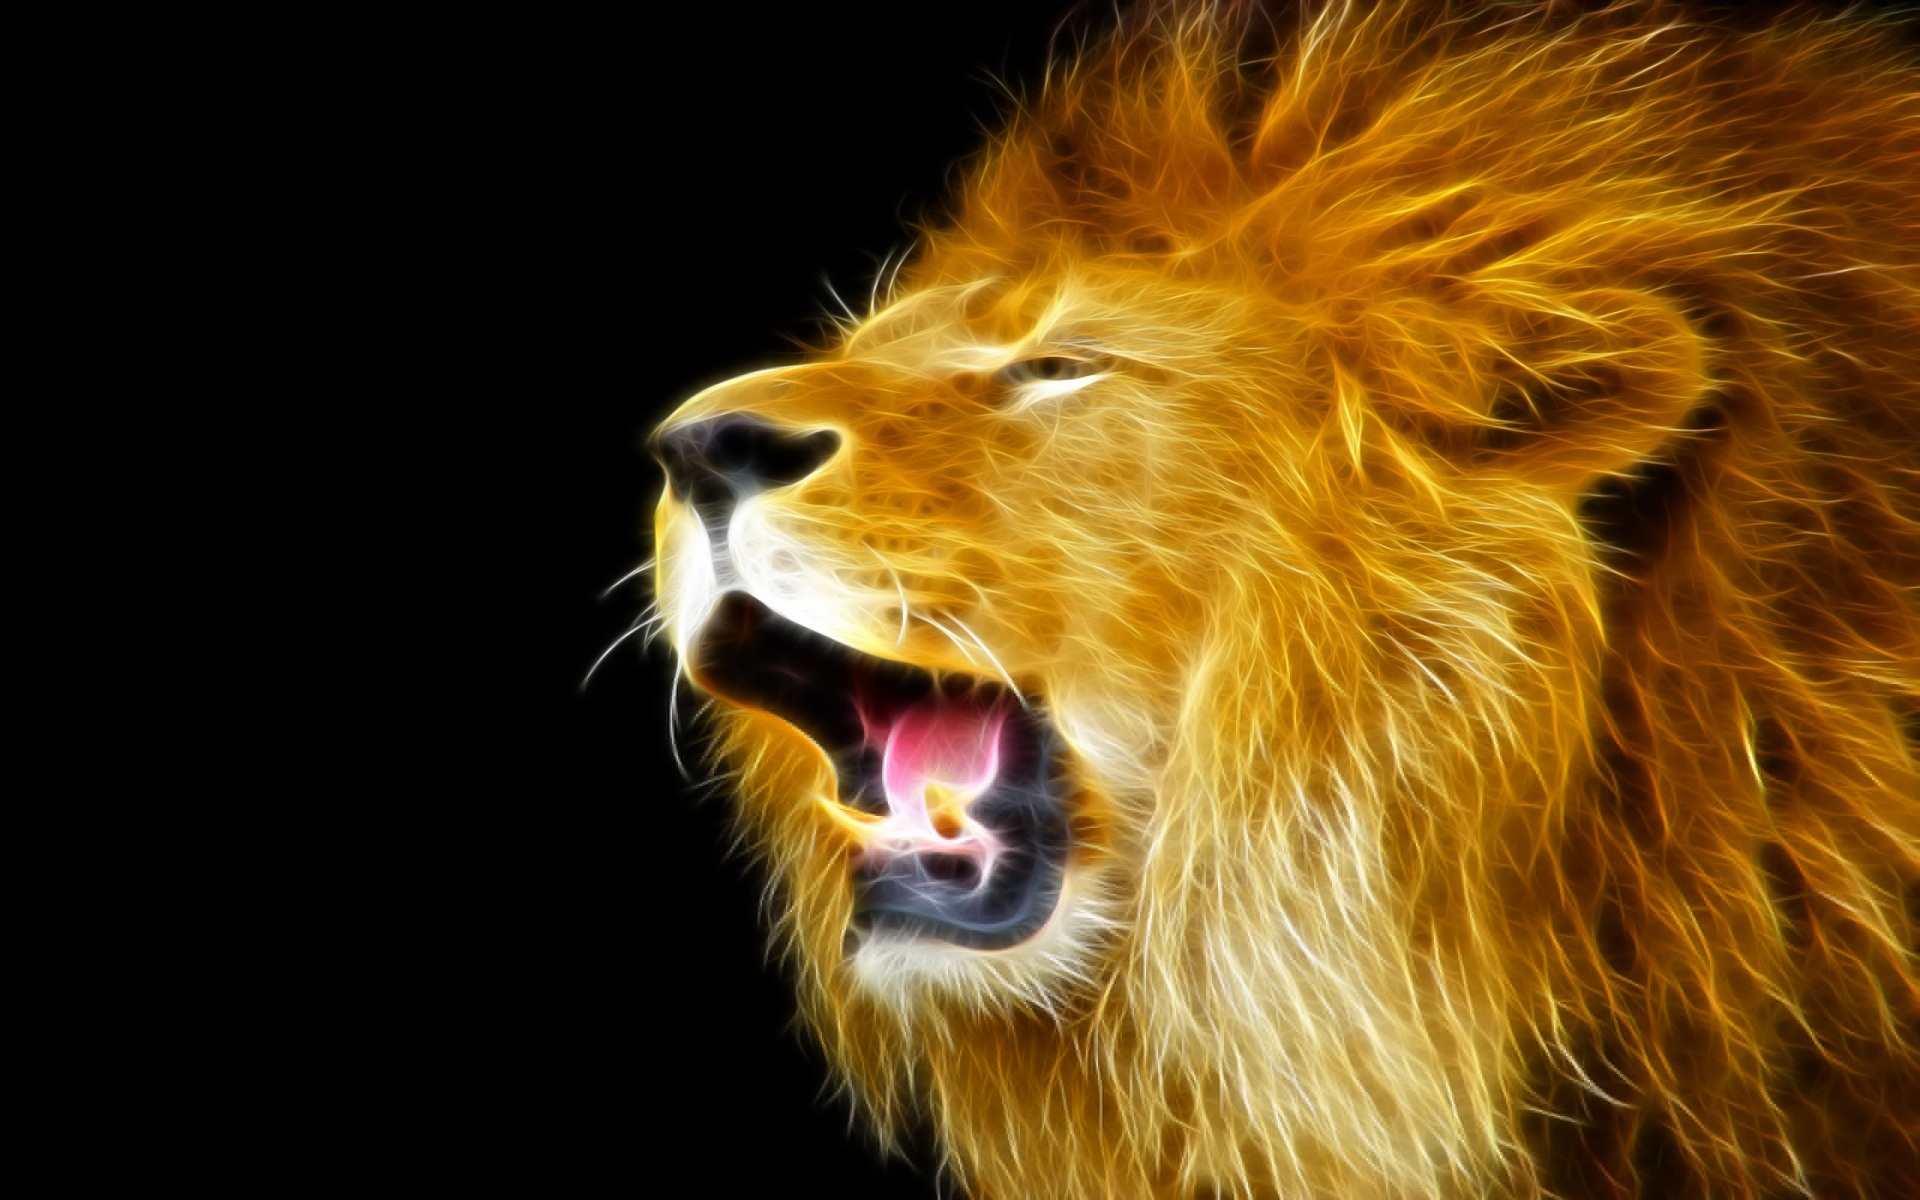 Lion wallpaper by LegendaryCollection - Download on ZEDGE™ | dfb5